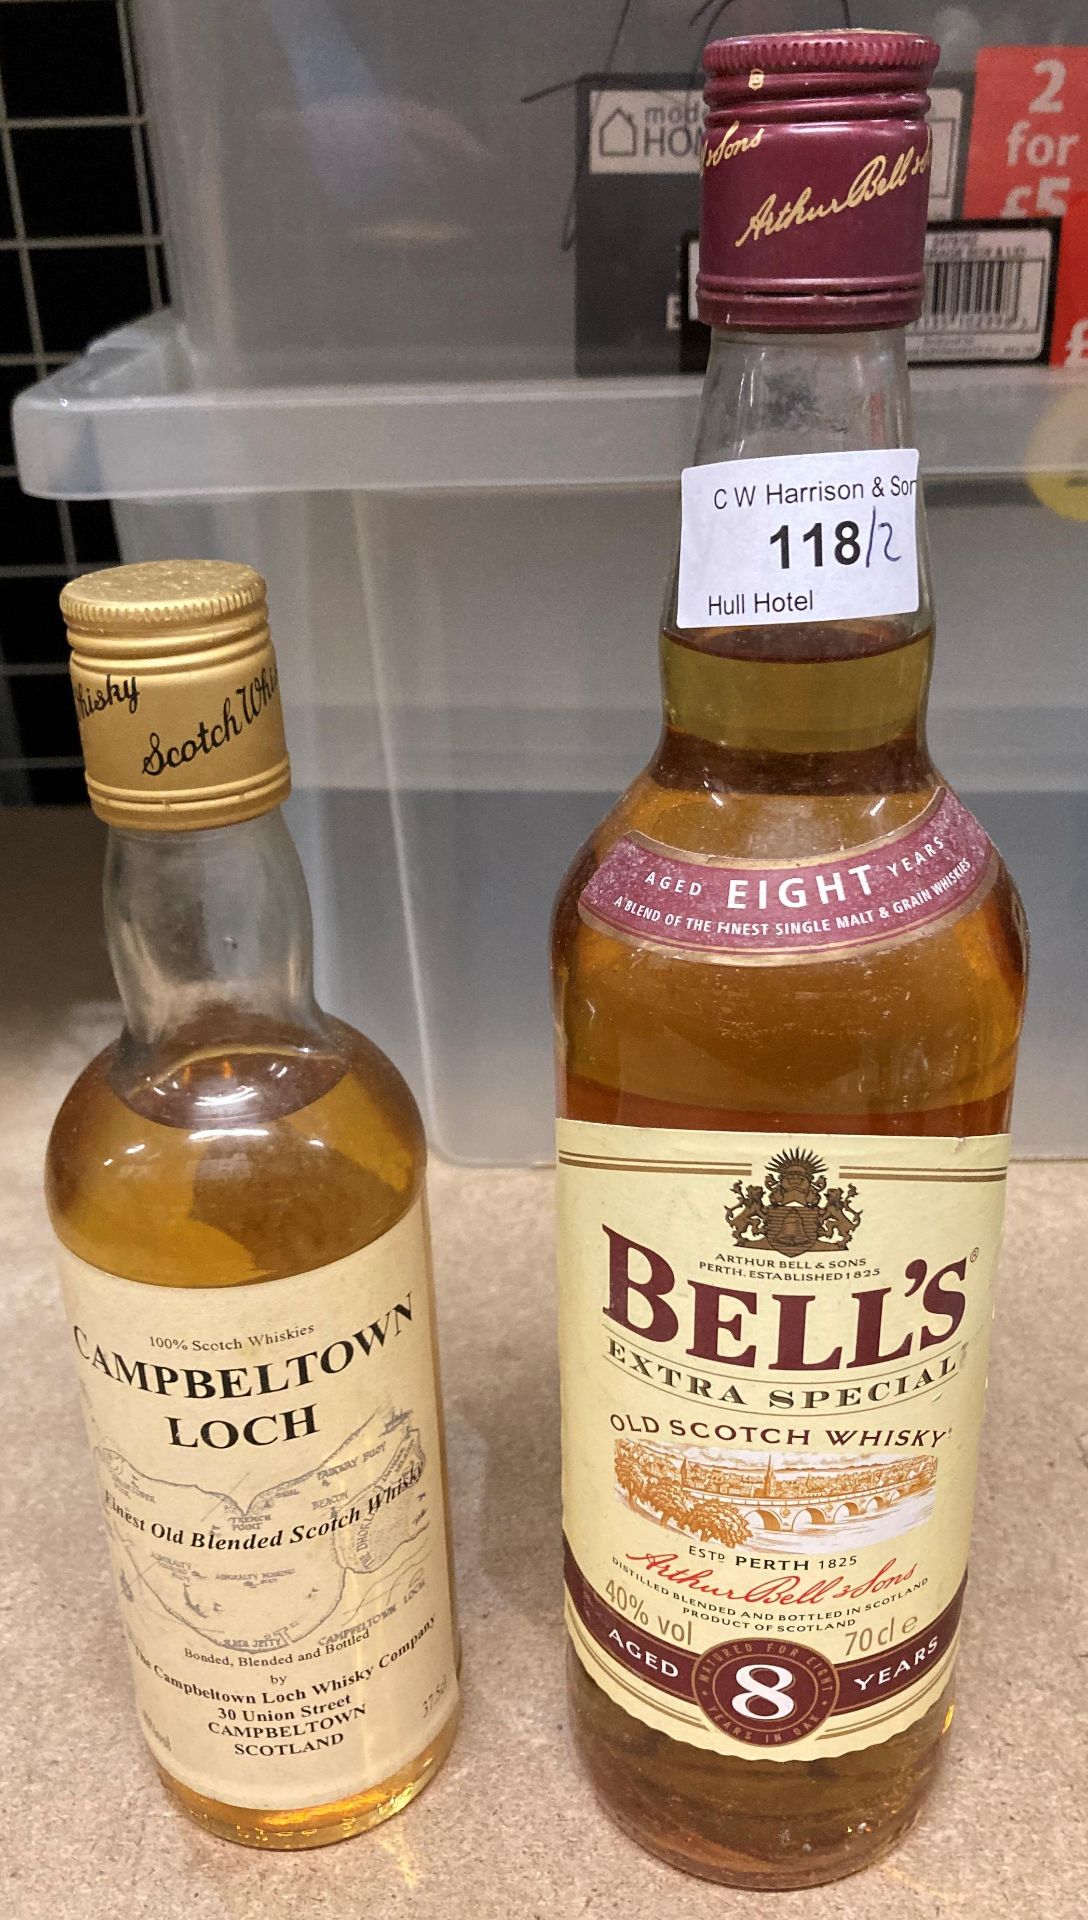 A 70cl bottle of Bell's Extra Special Old Scotch Whisky (aged 8 years - 40% vol) and a 37.